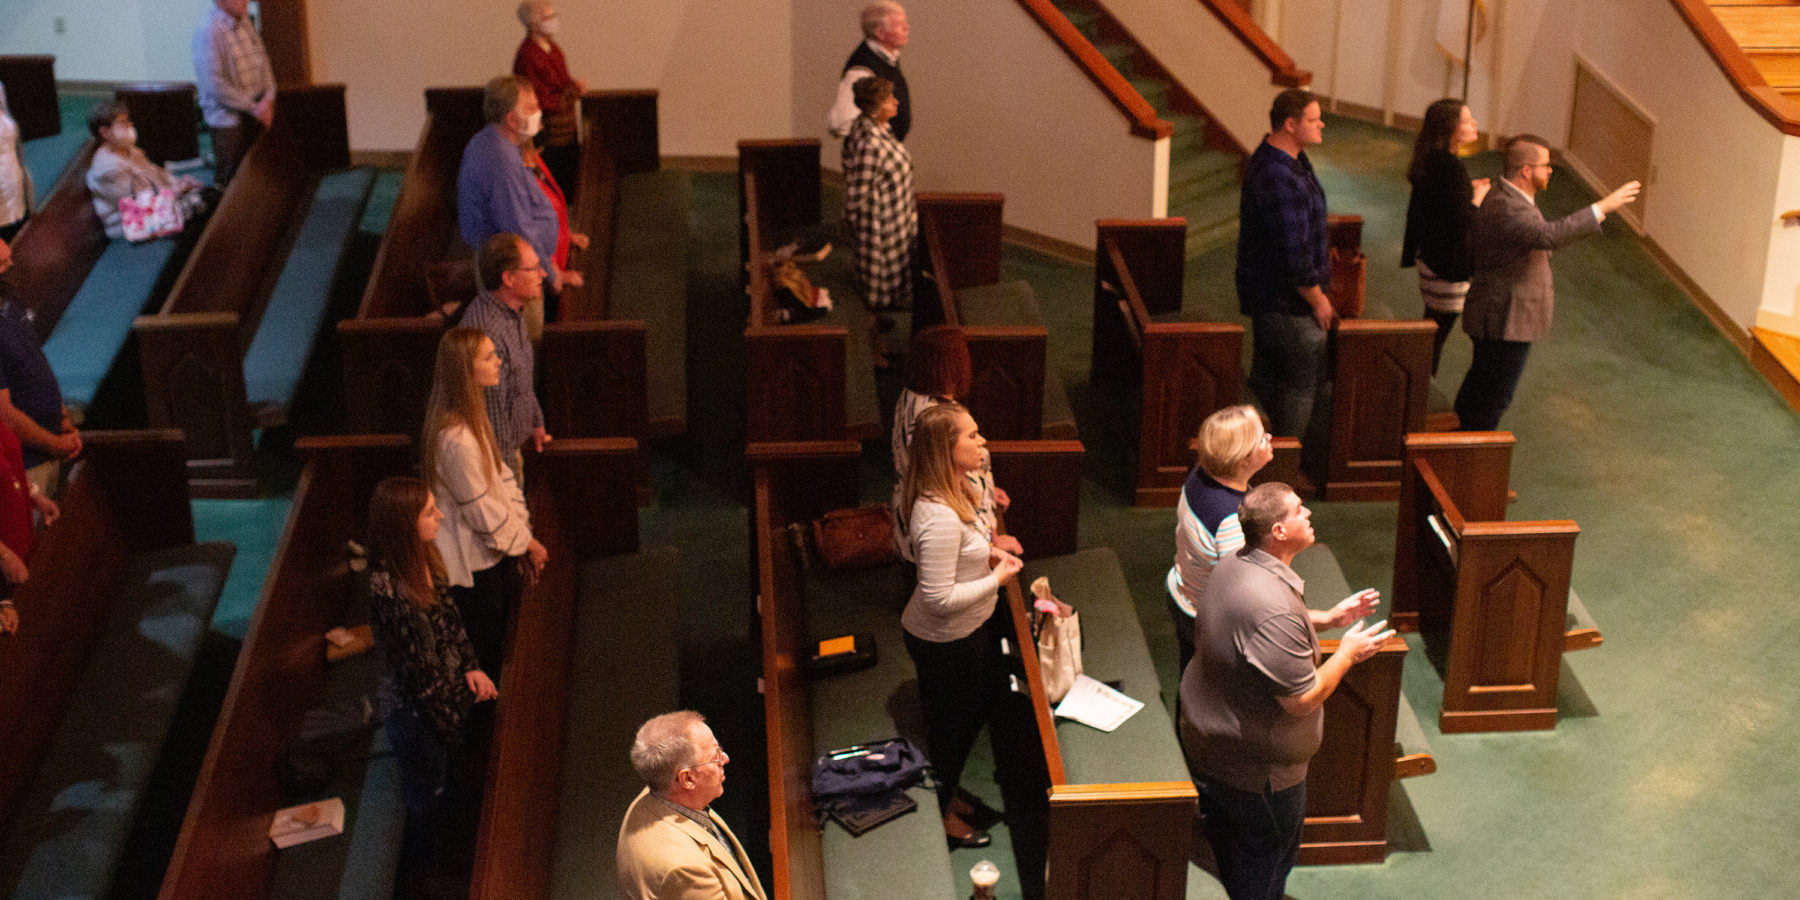 People worship in a sanctuary